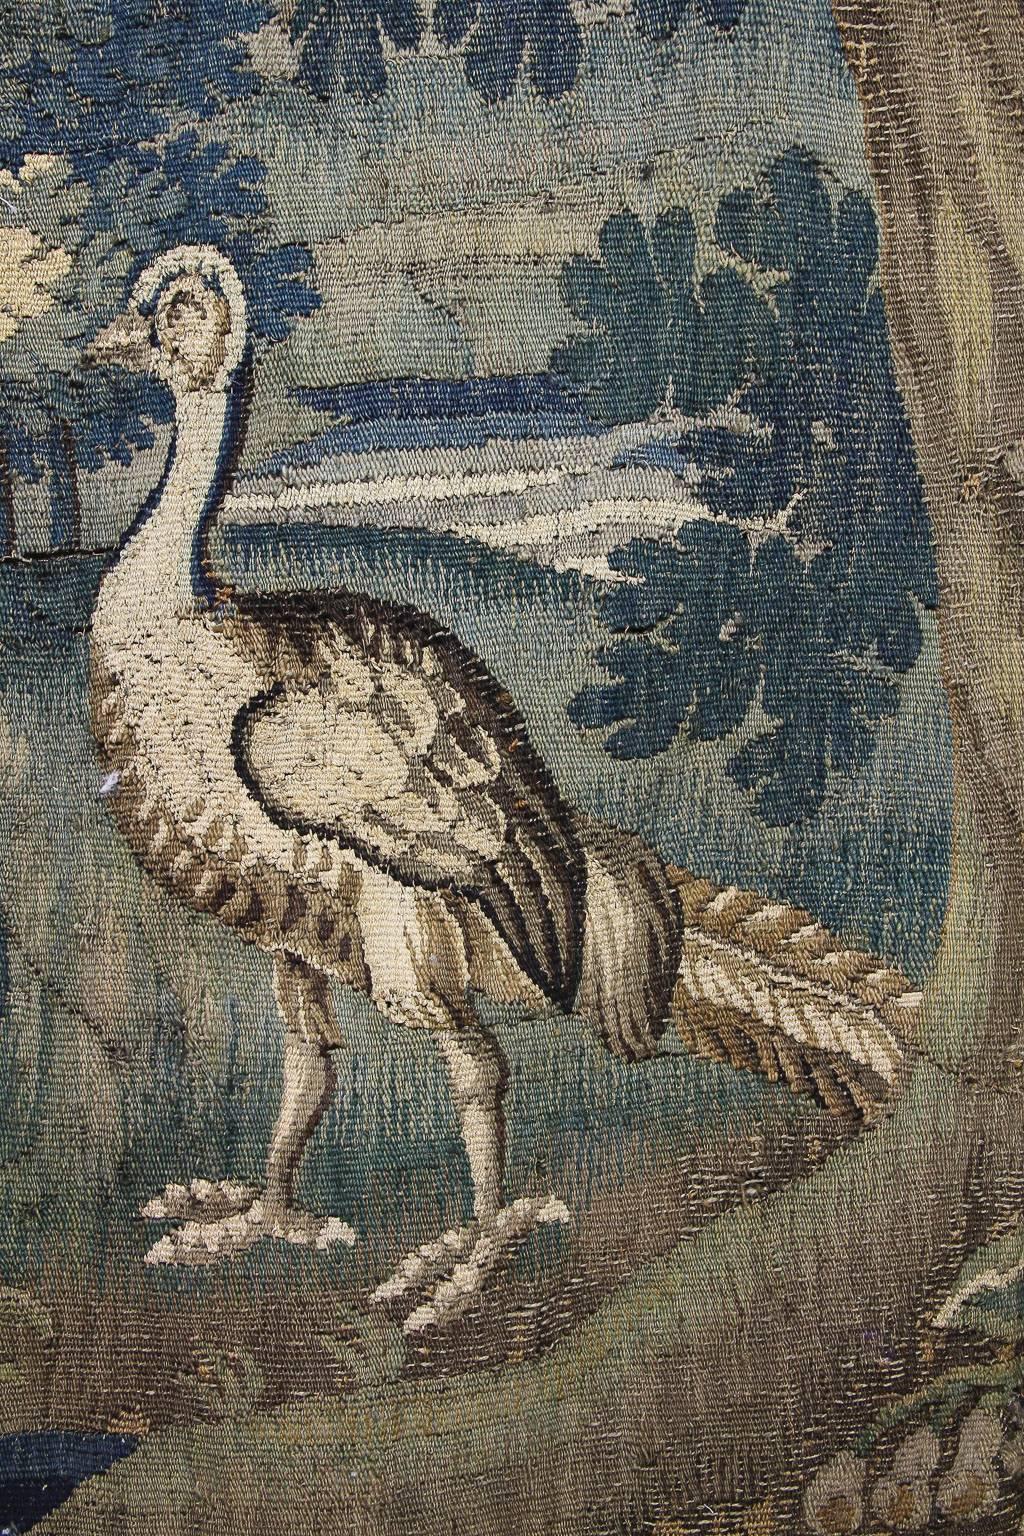 Originally part of a much bigger tapestry, the scene depicting two birds in a landscape.